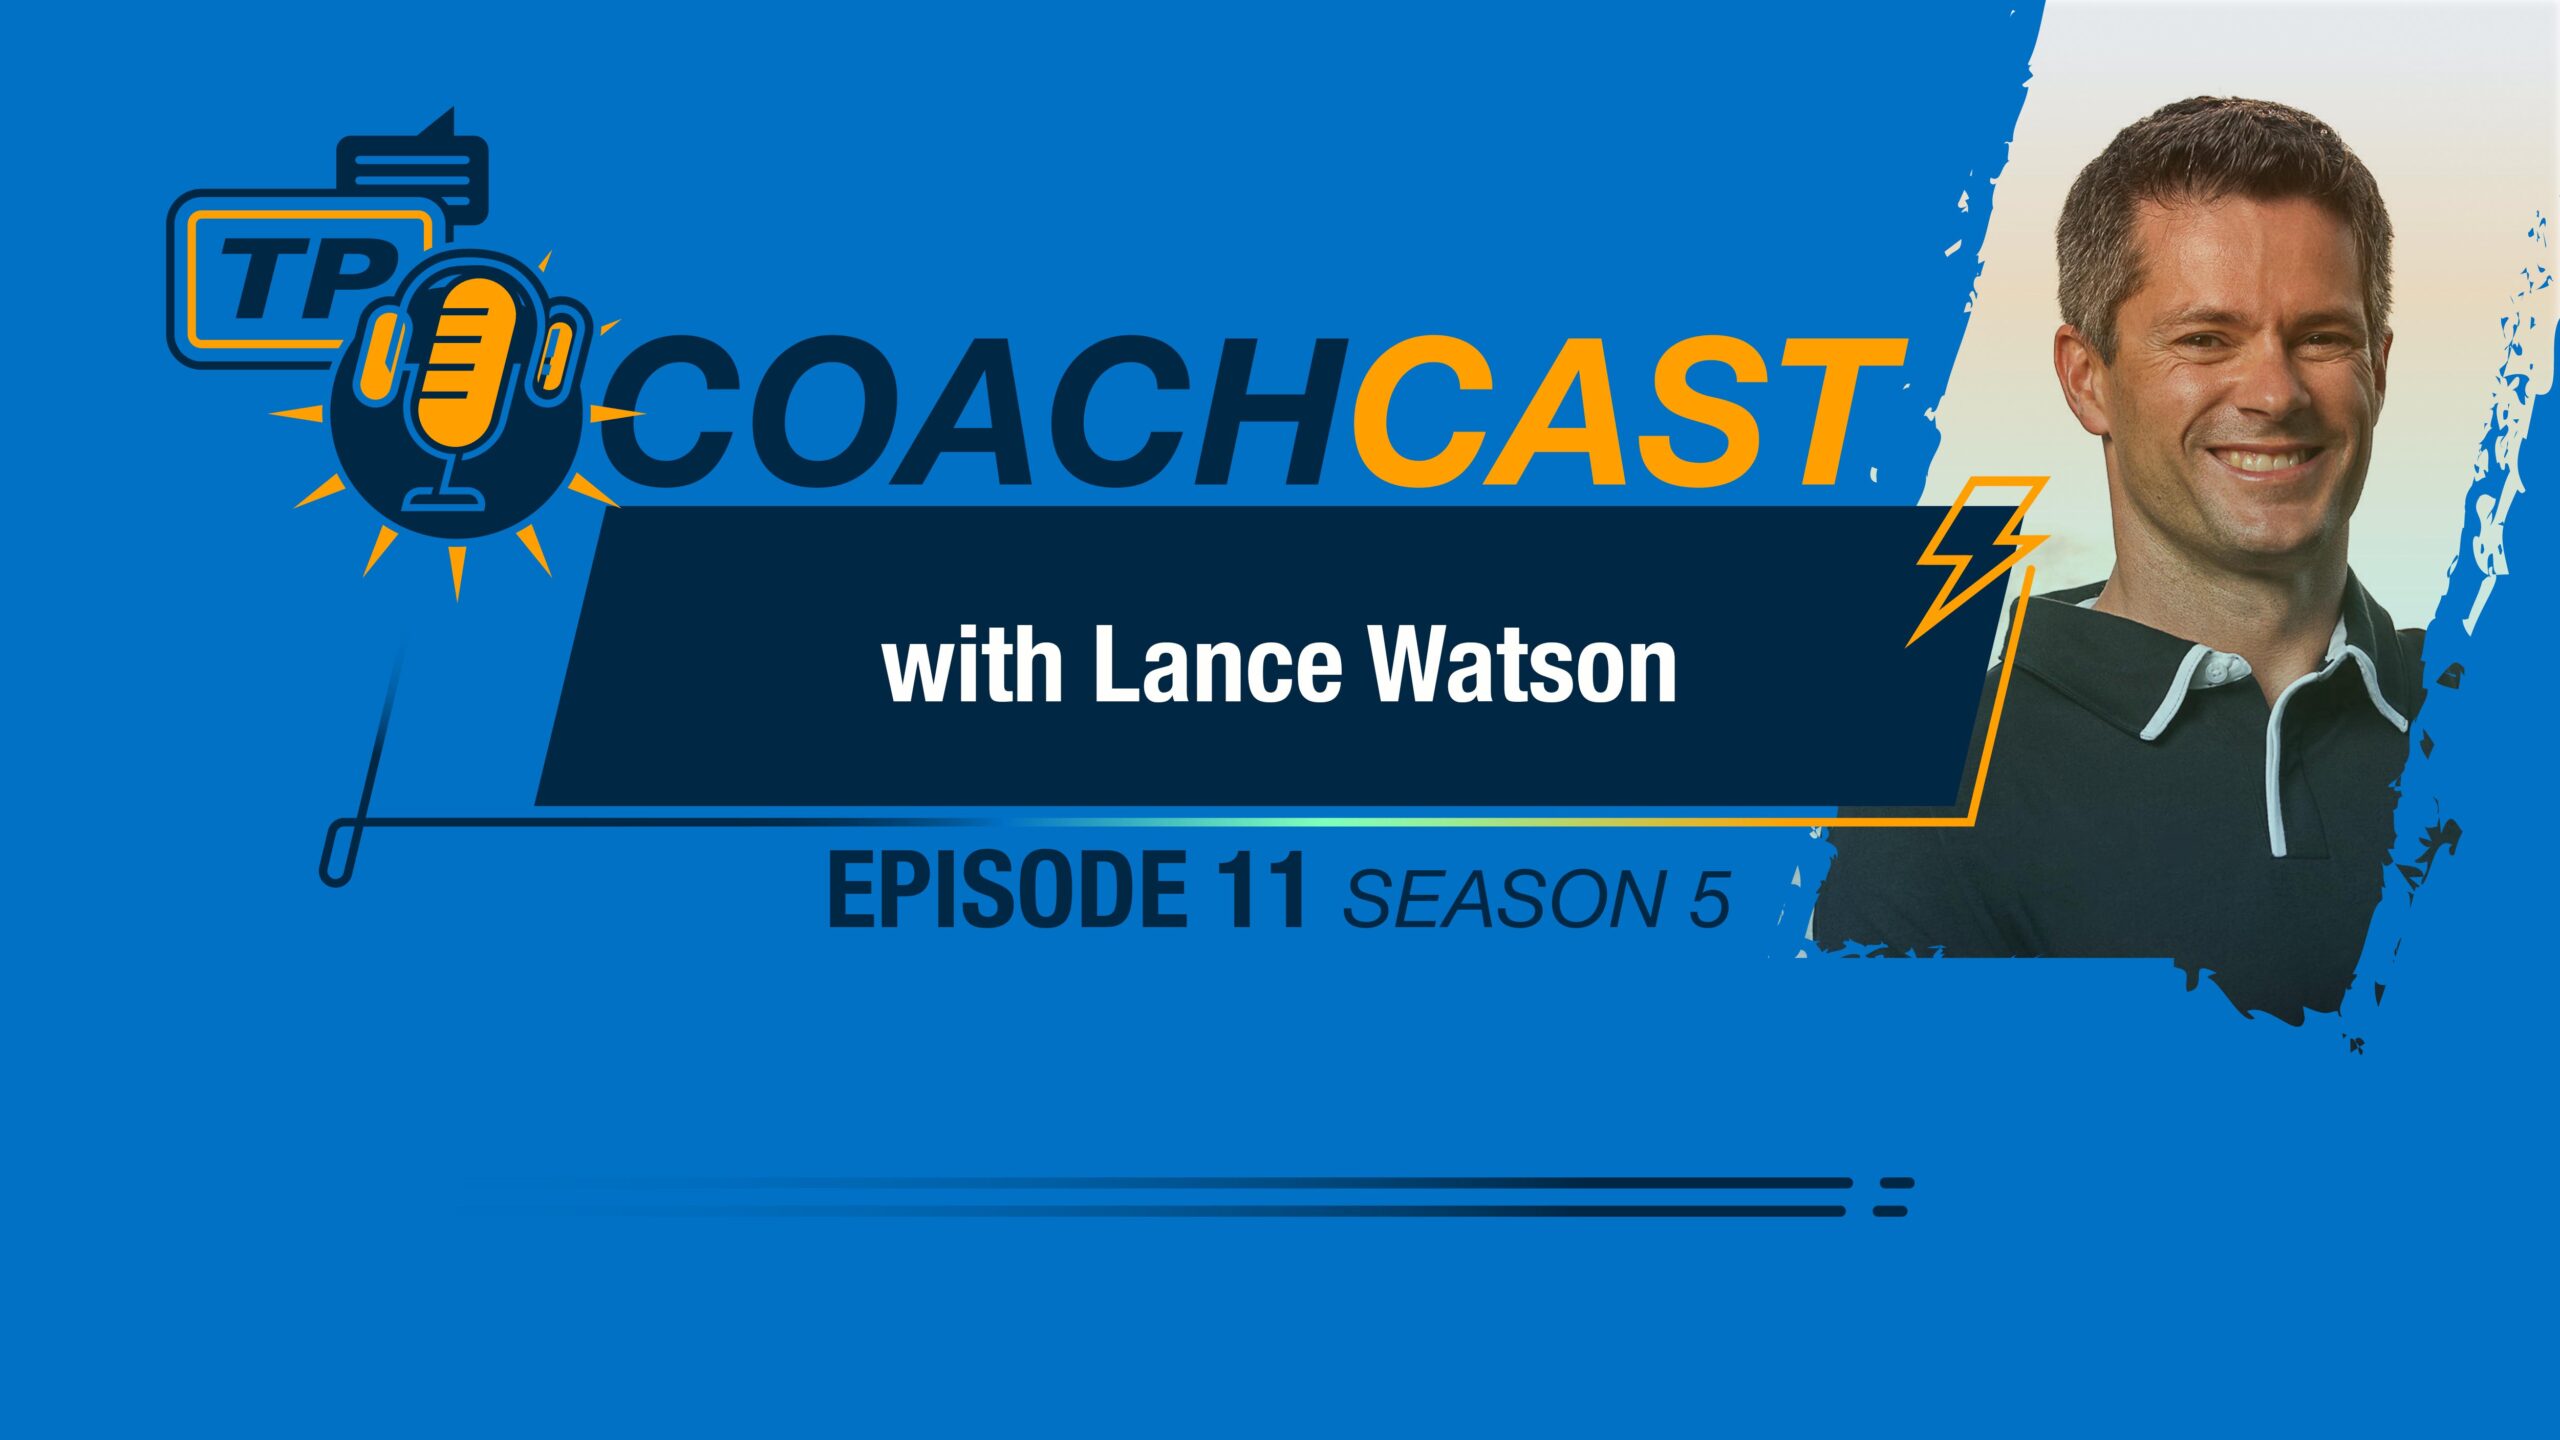 Coachcast Title Card For Lance Watson Ep 11